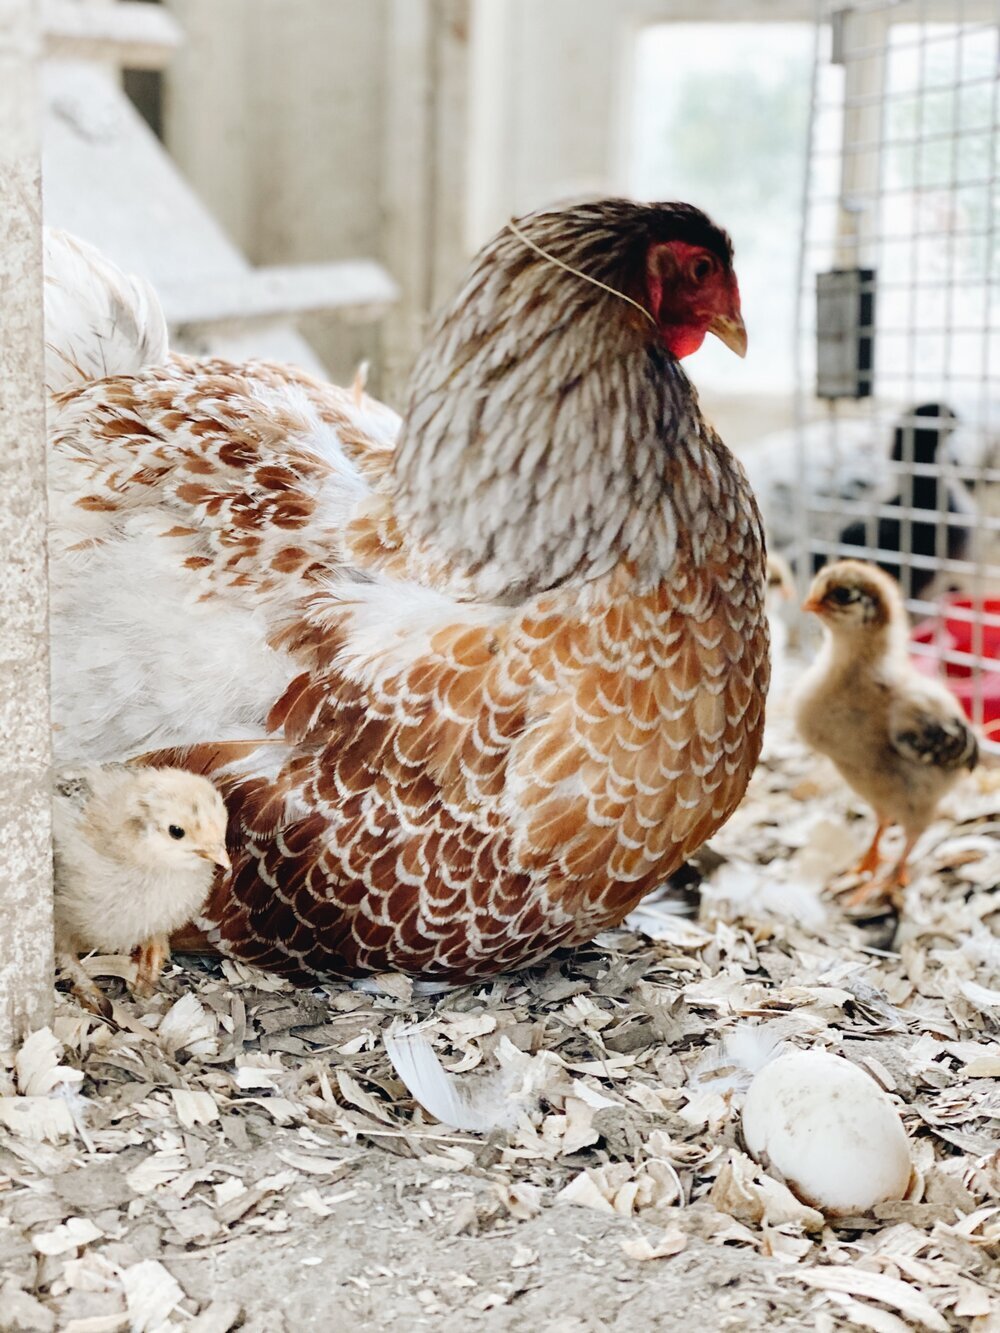 How to Care for Baby Chickens; Human vs. Hen Mama Comparison - Azure Farm